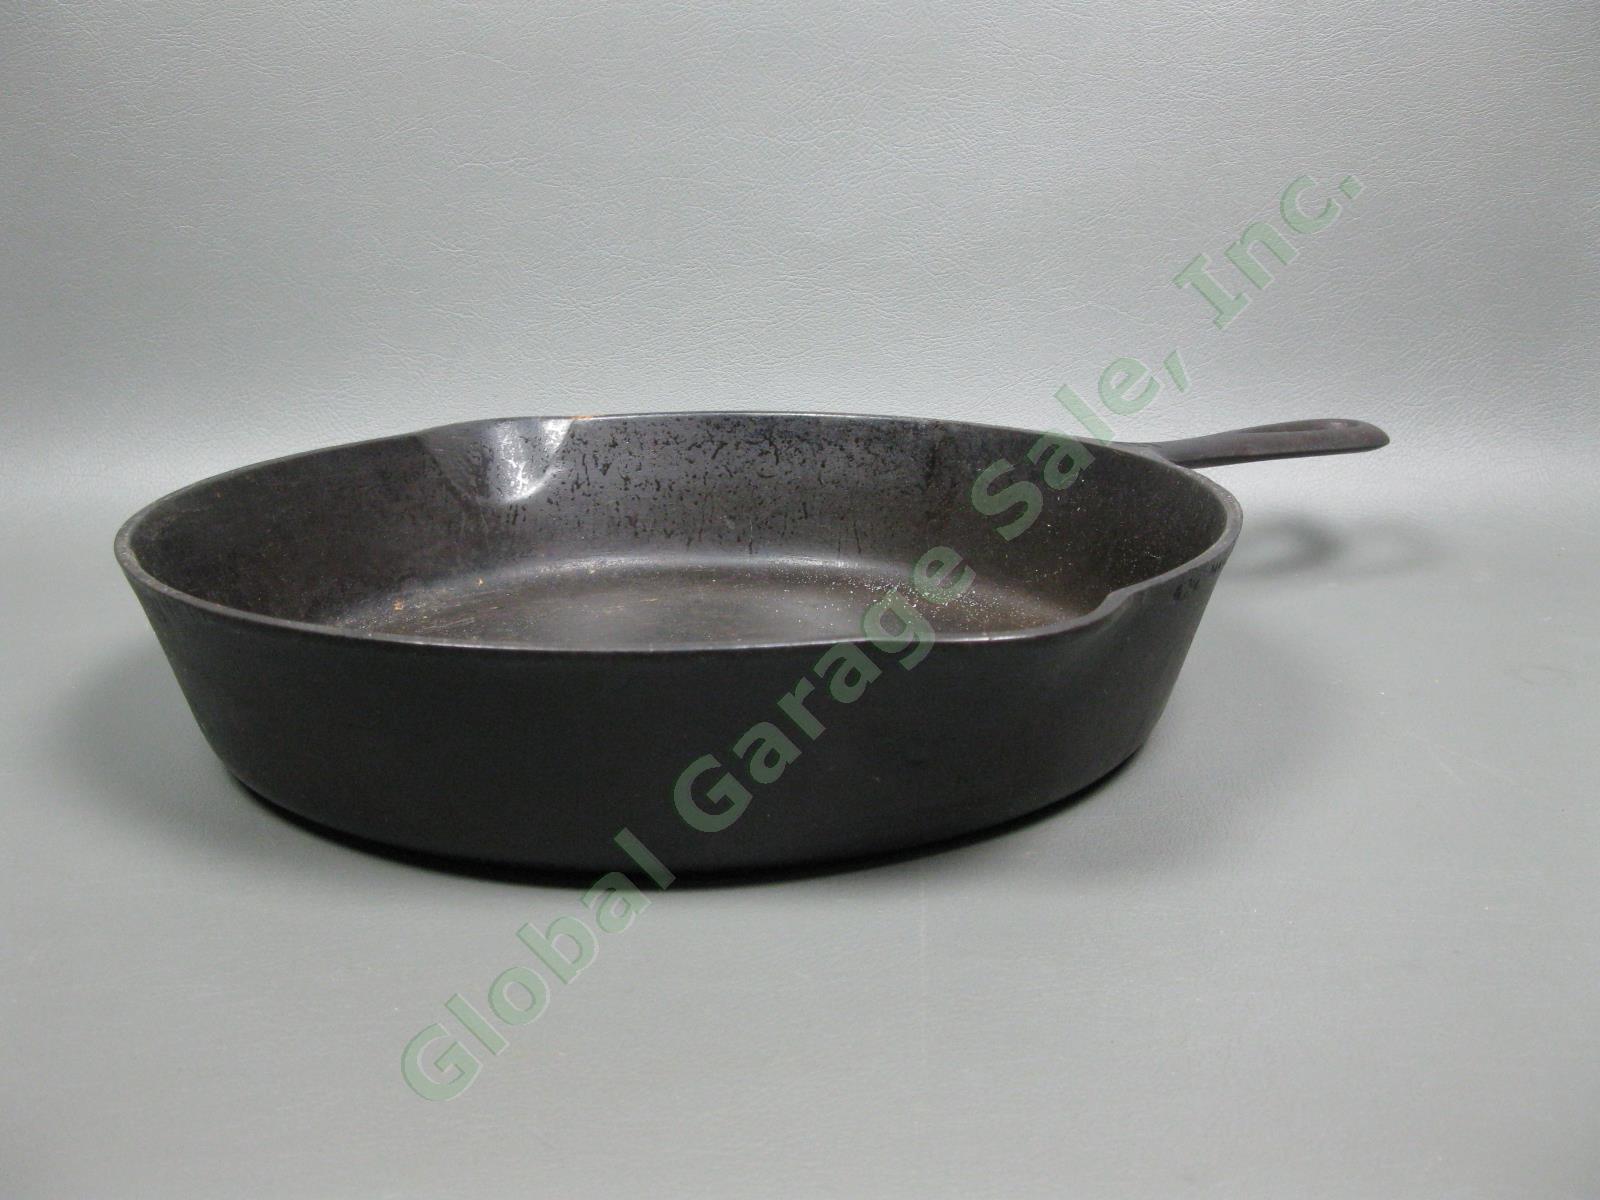 Vintage Griswold No-9 710-B Large Cast Iron Frying Pan Skillet Cookware Erie PA 6